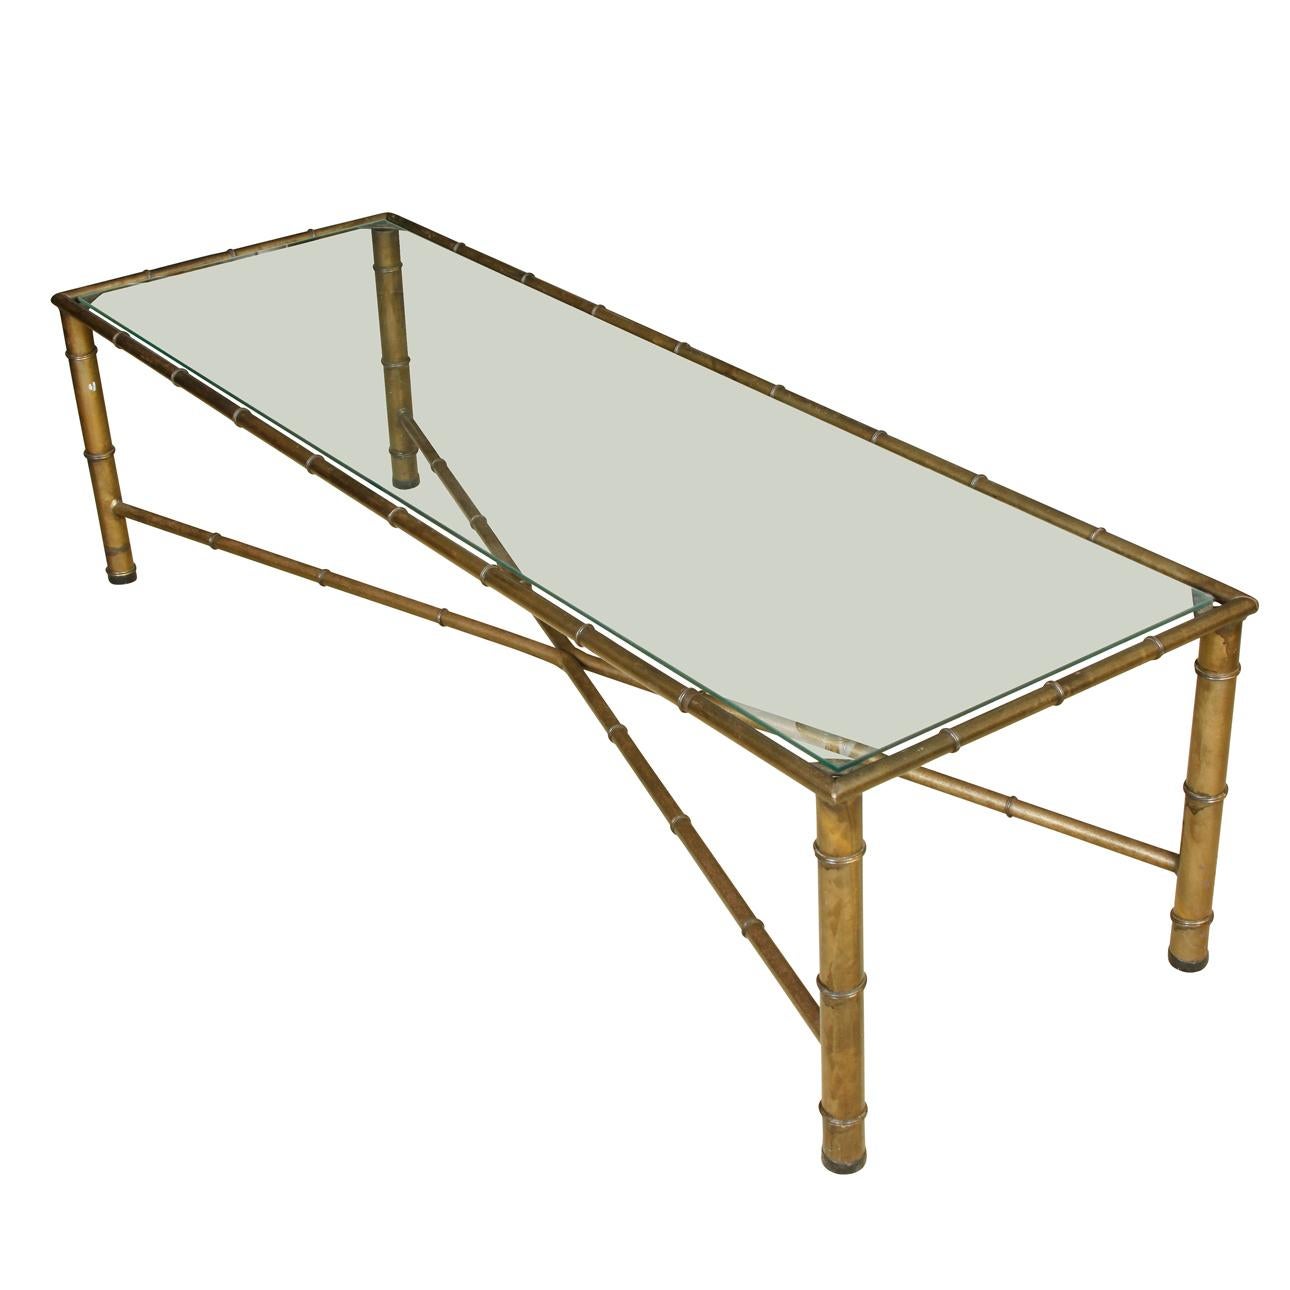 Gilt metal bamboo long rectangular glass top coffee table with X-stretcher.